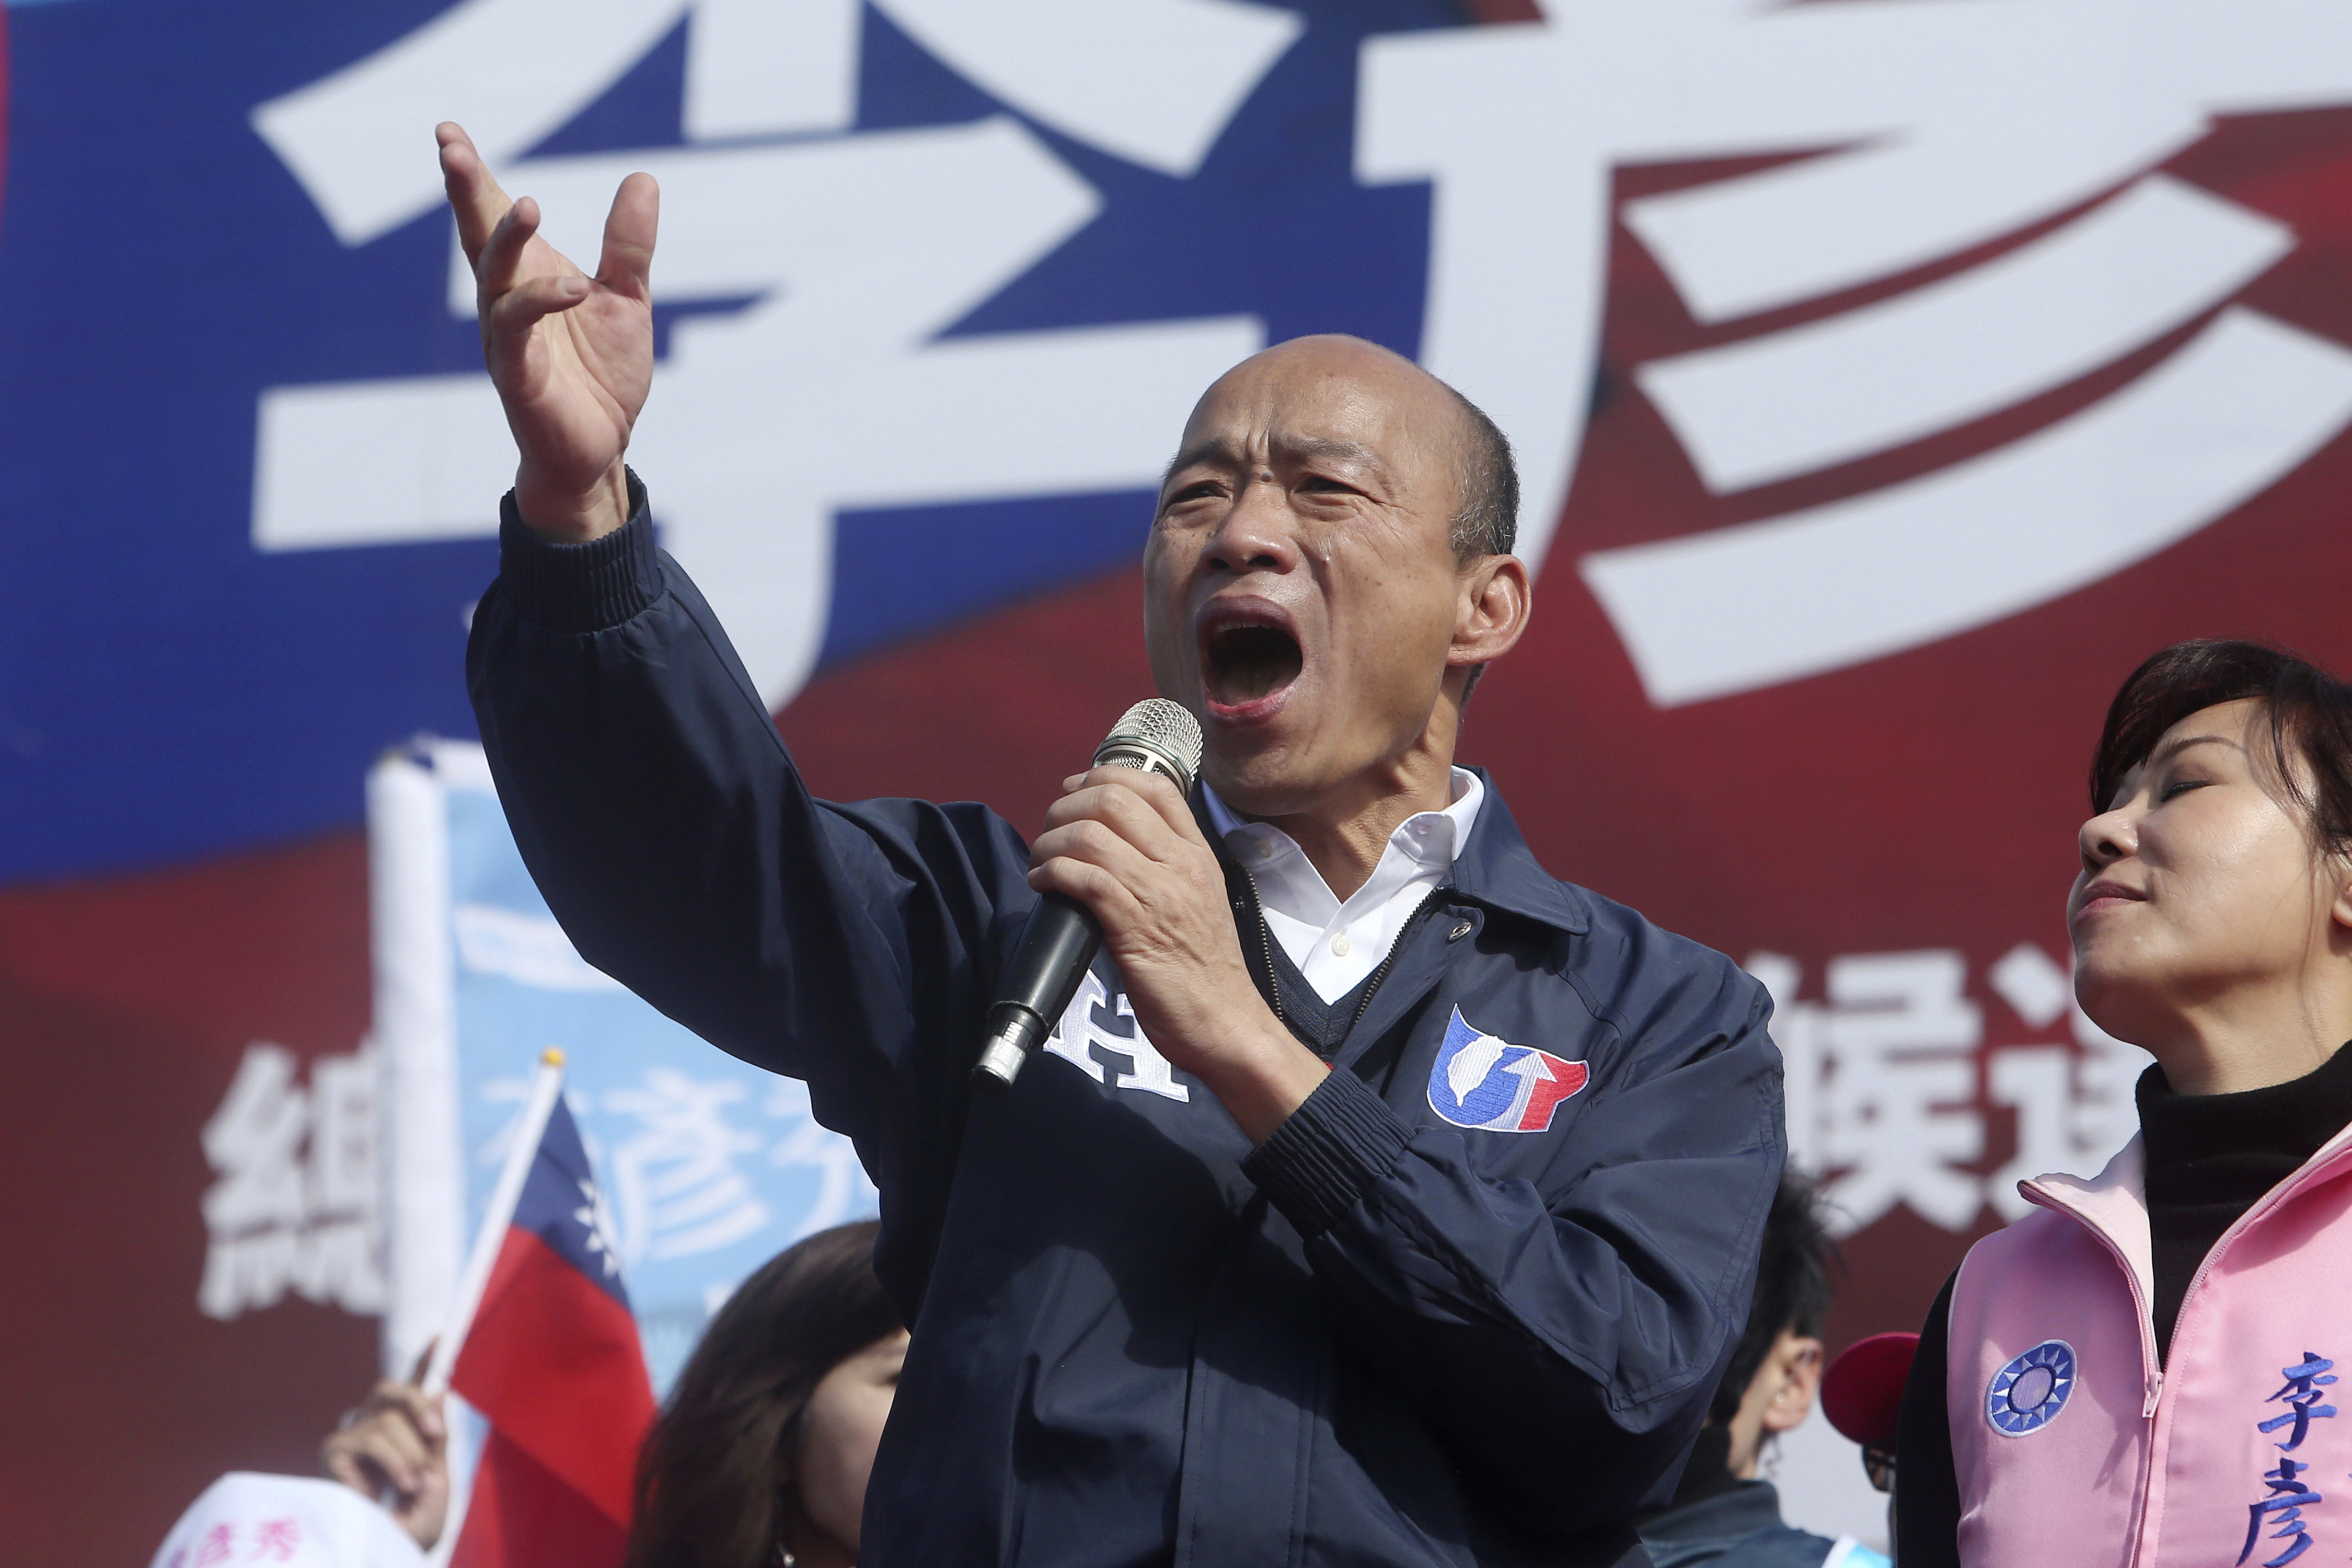 Taiwan's 2020 presidential election candidate, KMT or Nationalist Party's Han Kuo-yu, delivers a speech during a campaign rally in Taipei, Taiwan, Saturday, Dec. 28, 2019. (Chiang Ying-ying–AP)